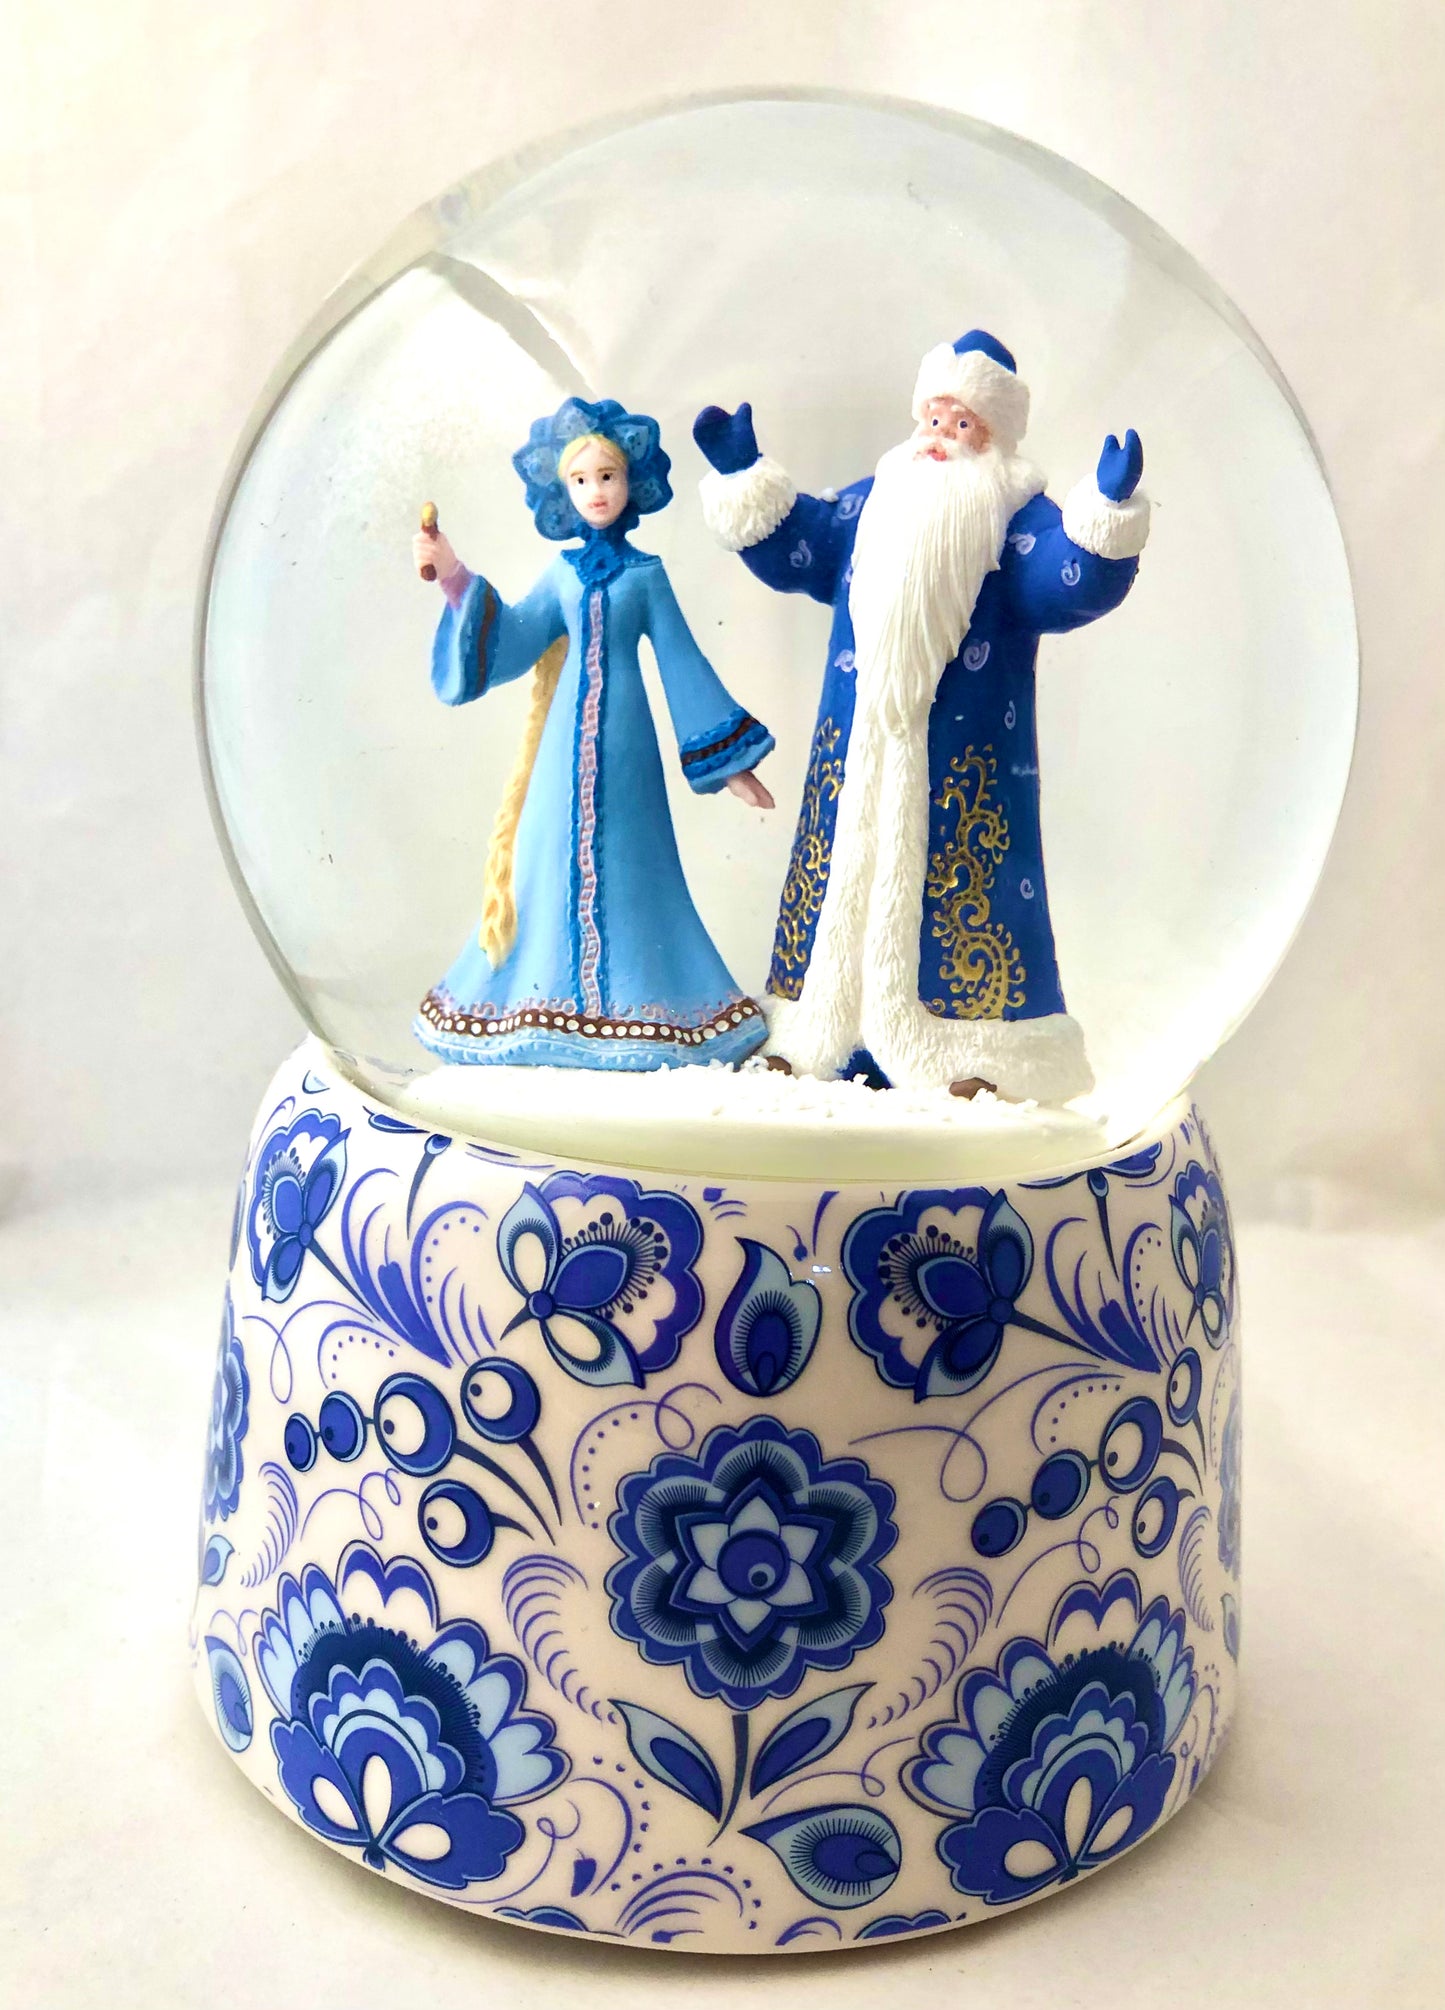 Music box with Santa Claus in blue